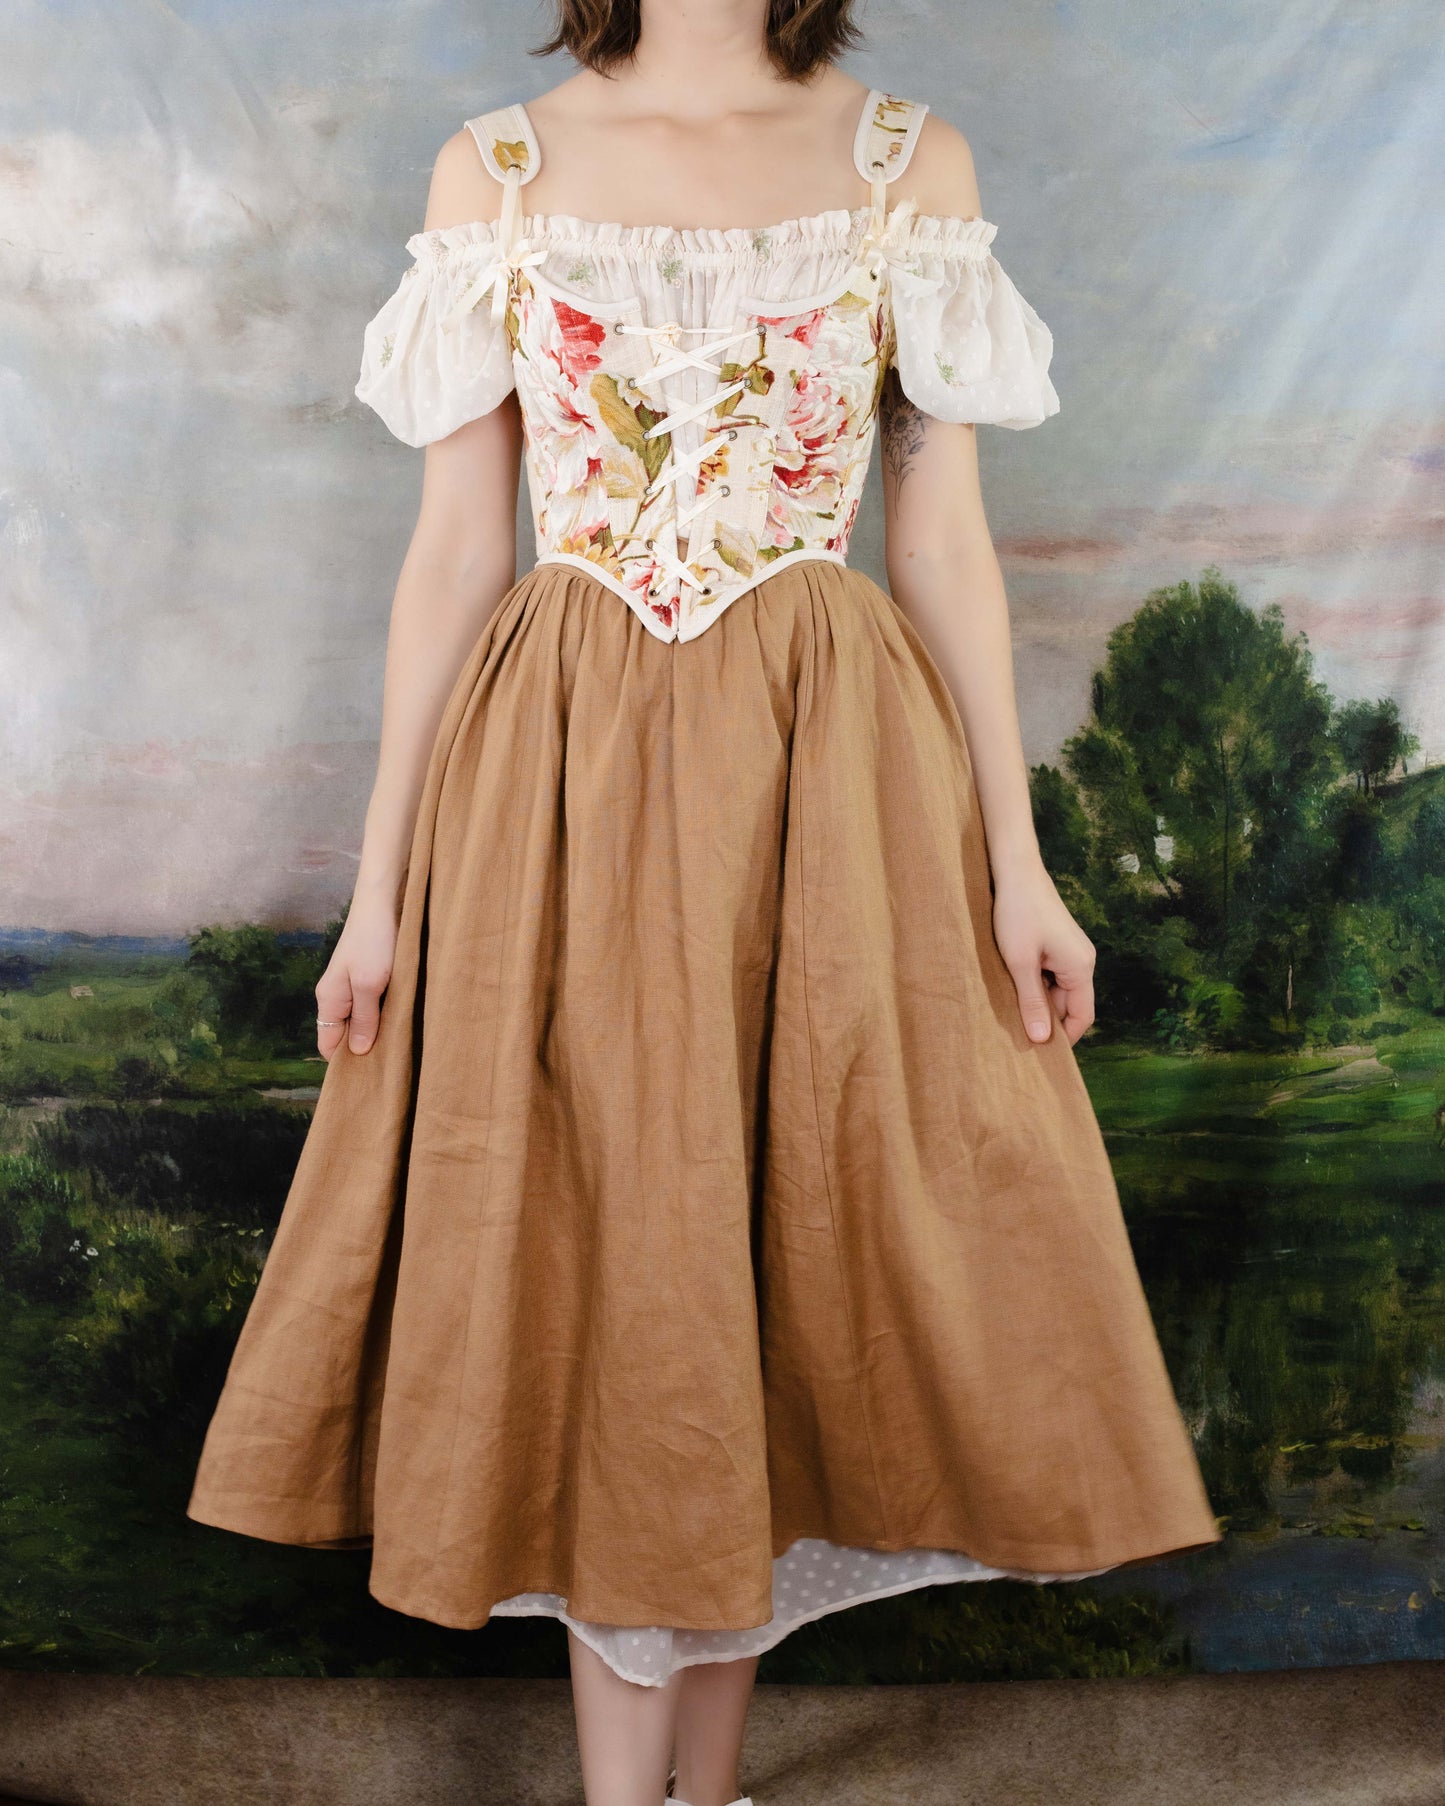 a complete renaissance faire outfit featuring a pink floral corset paired with a ginger linen renaissance skirt and chemise dress